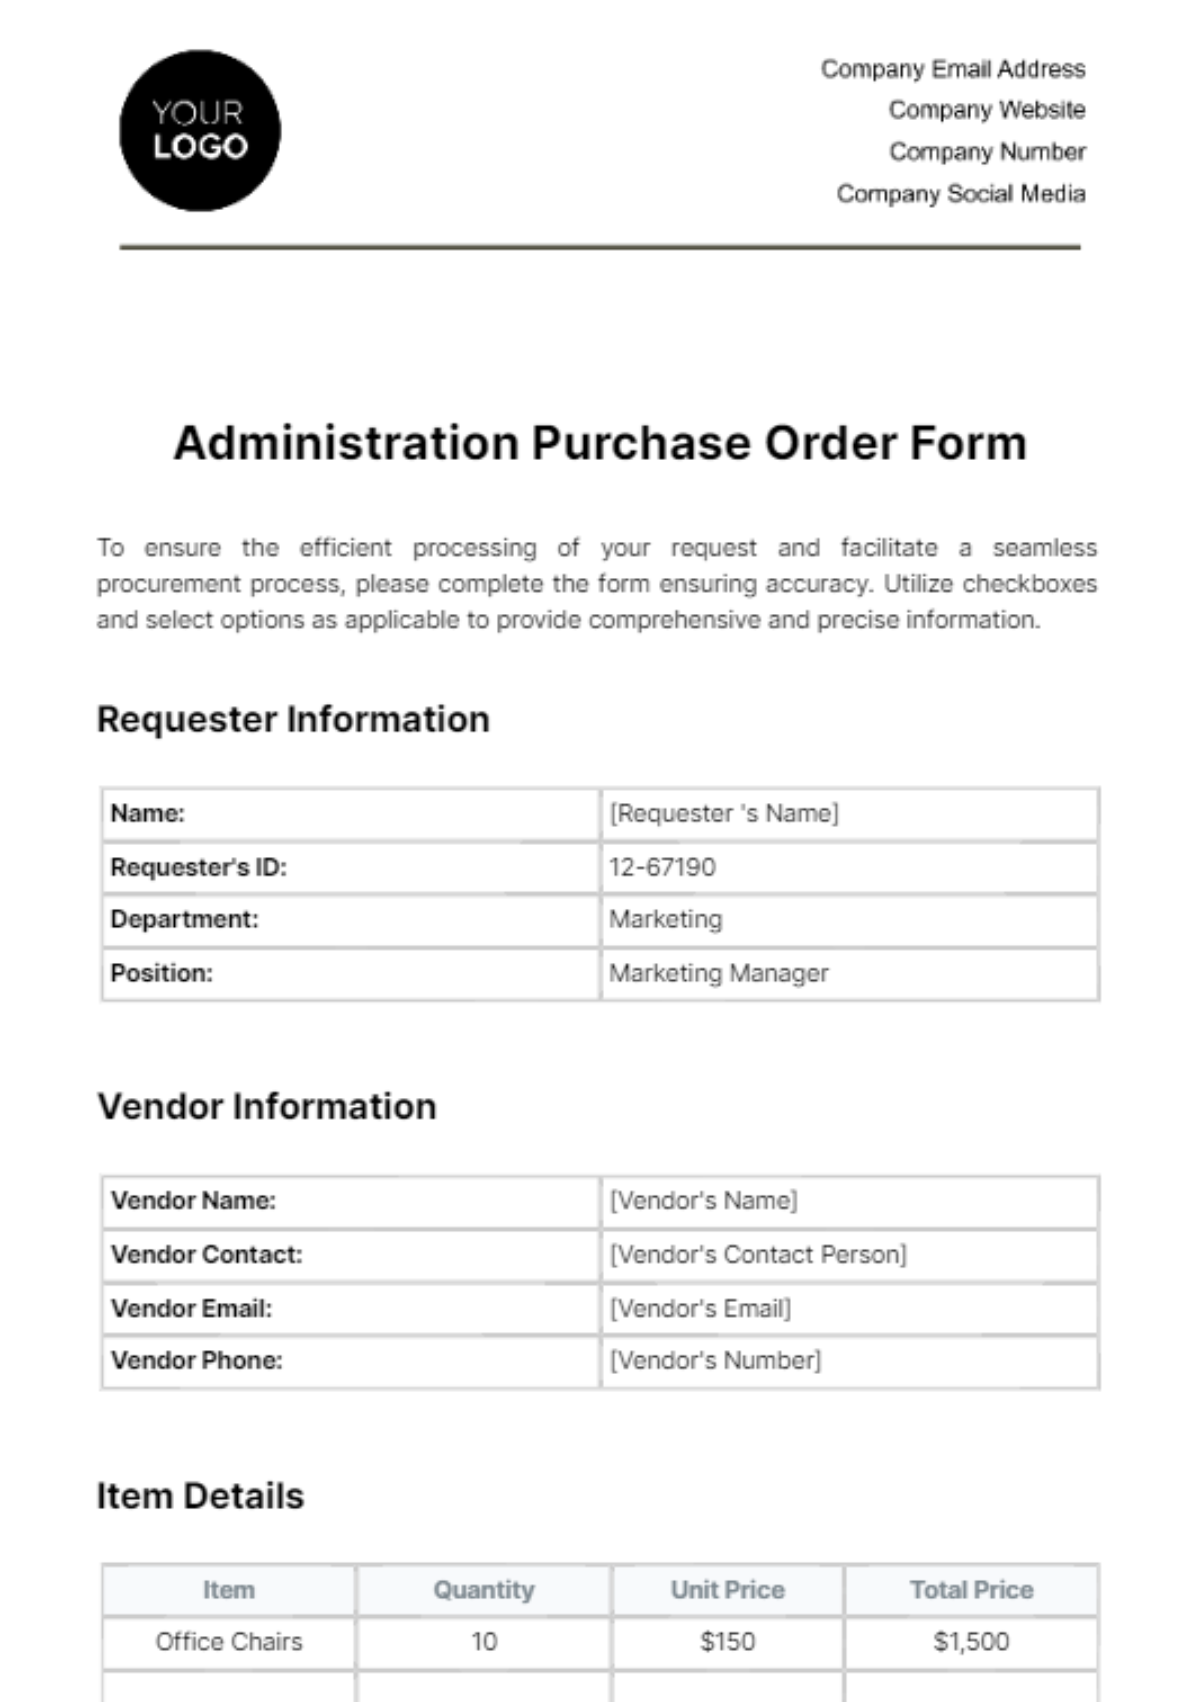 Free Administration Purchase Order Form Template